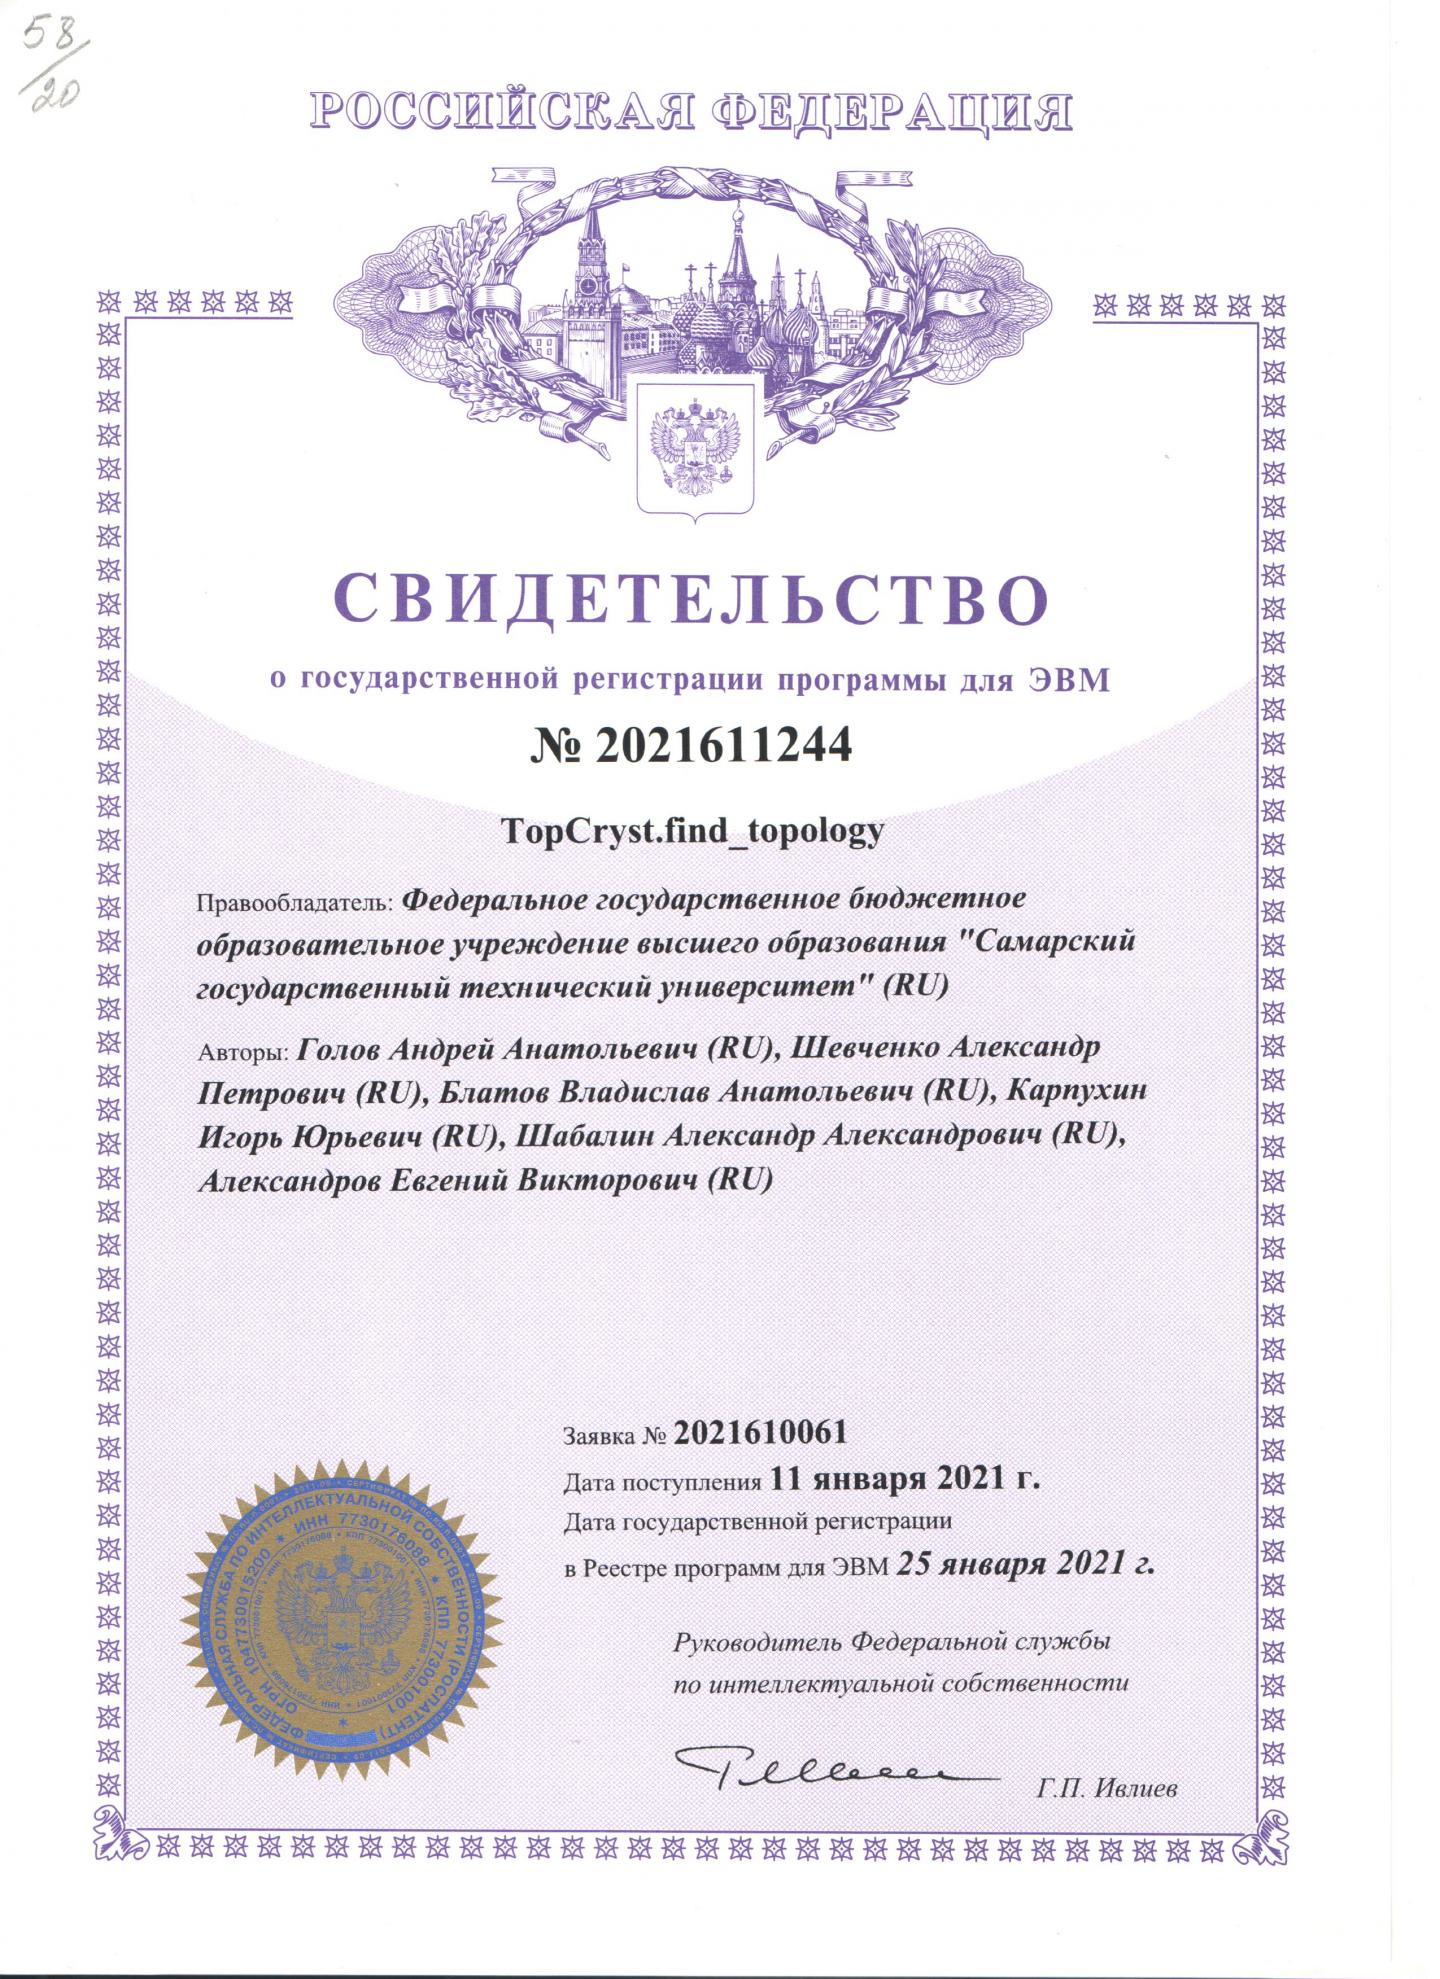 The certificate of official registration of the Find Topology script